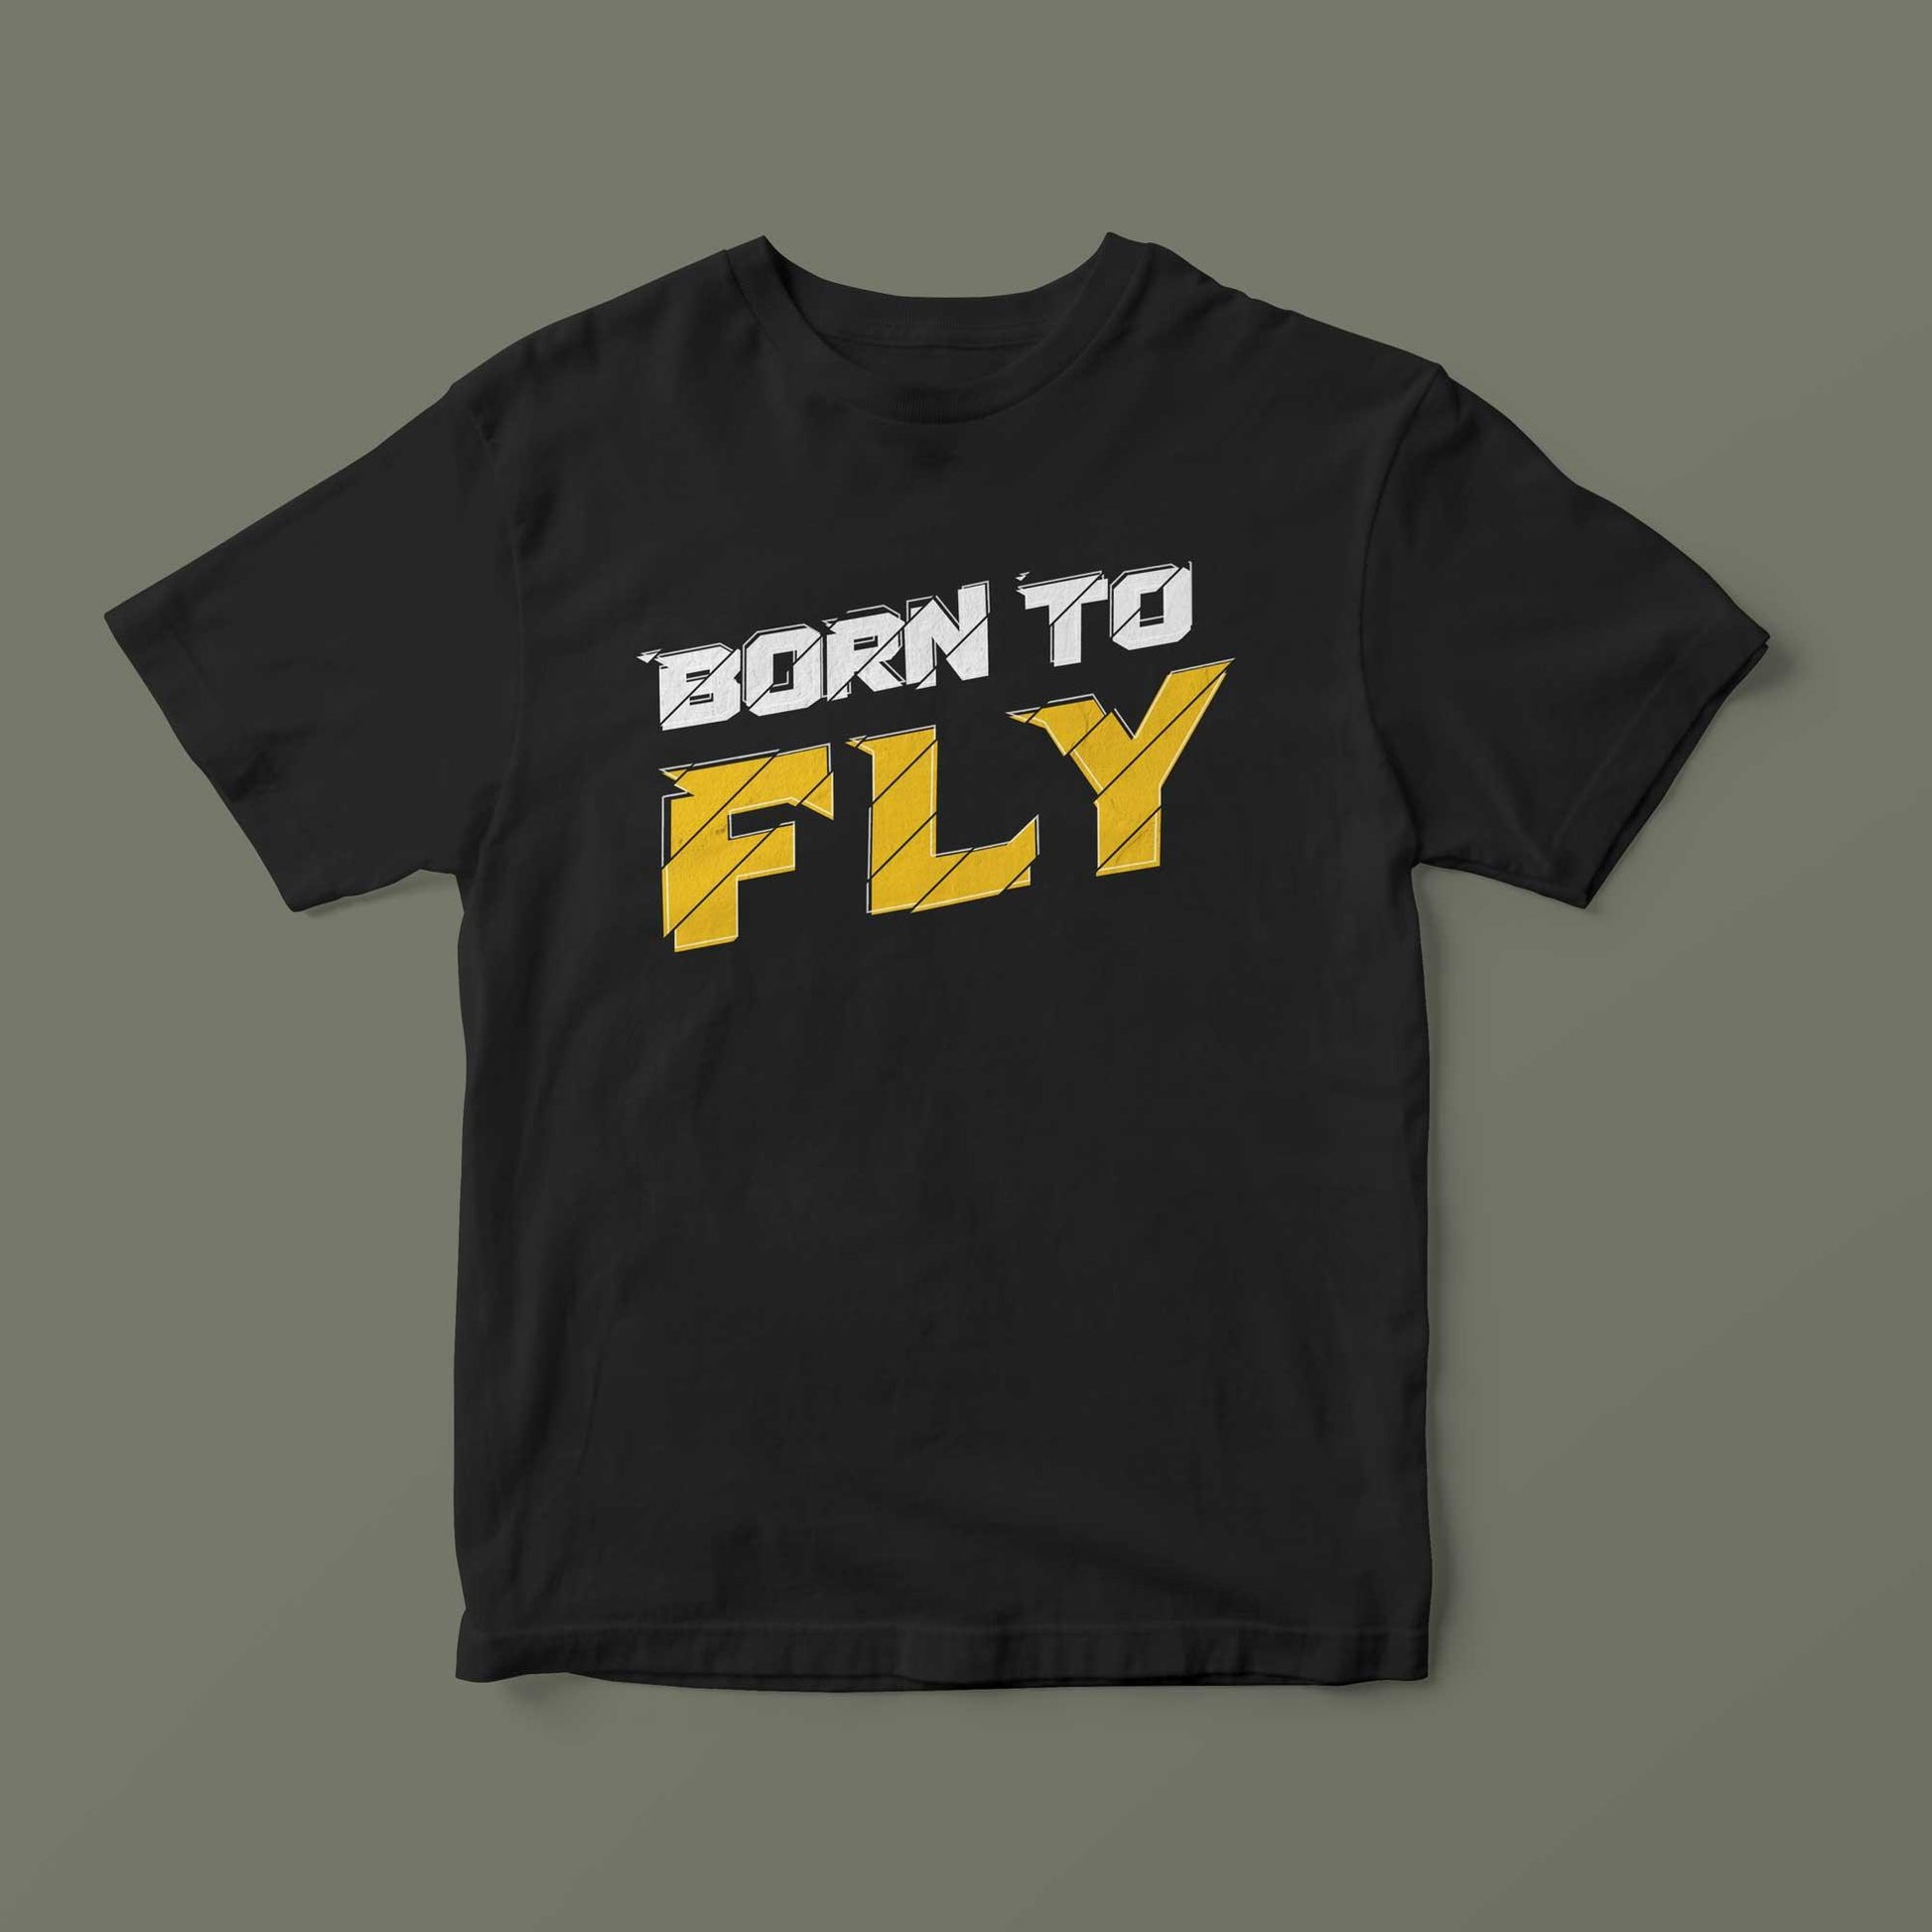 T-SHIRT BORN TO FLY - Andrea Pinotti Official